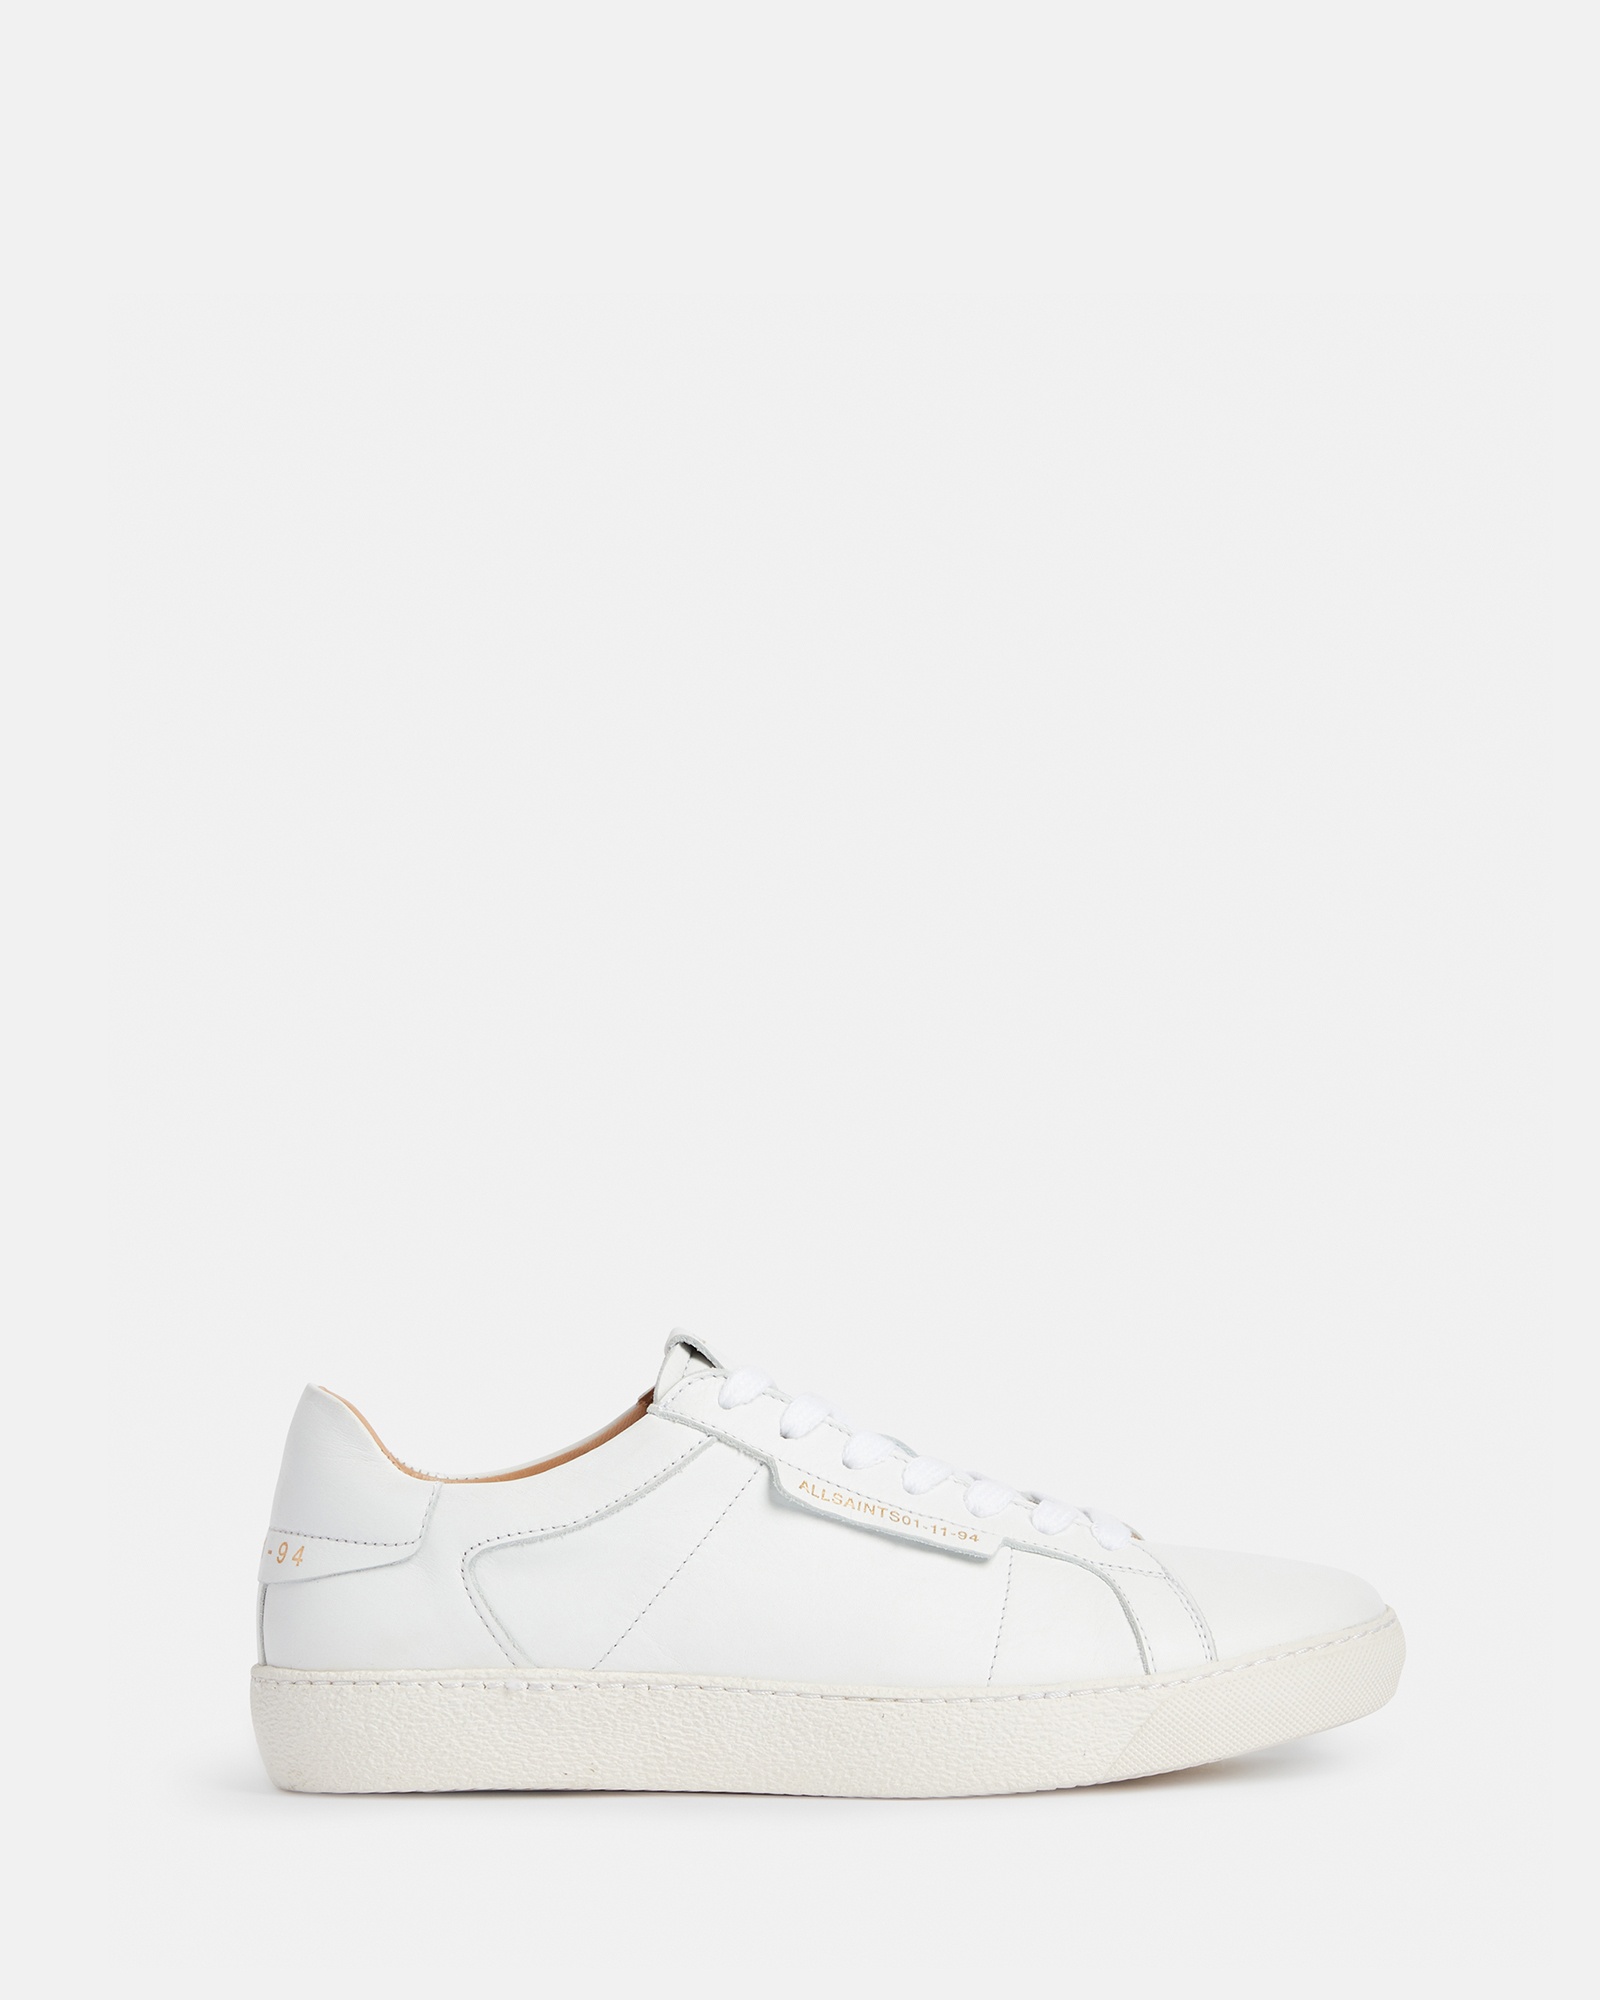 Sheer Leather Sneakers White | ALLSAINTS US